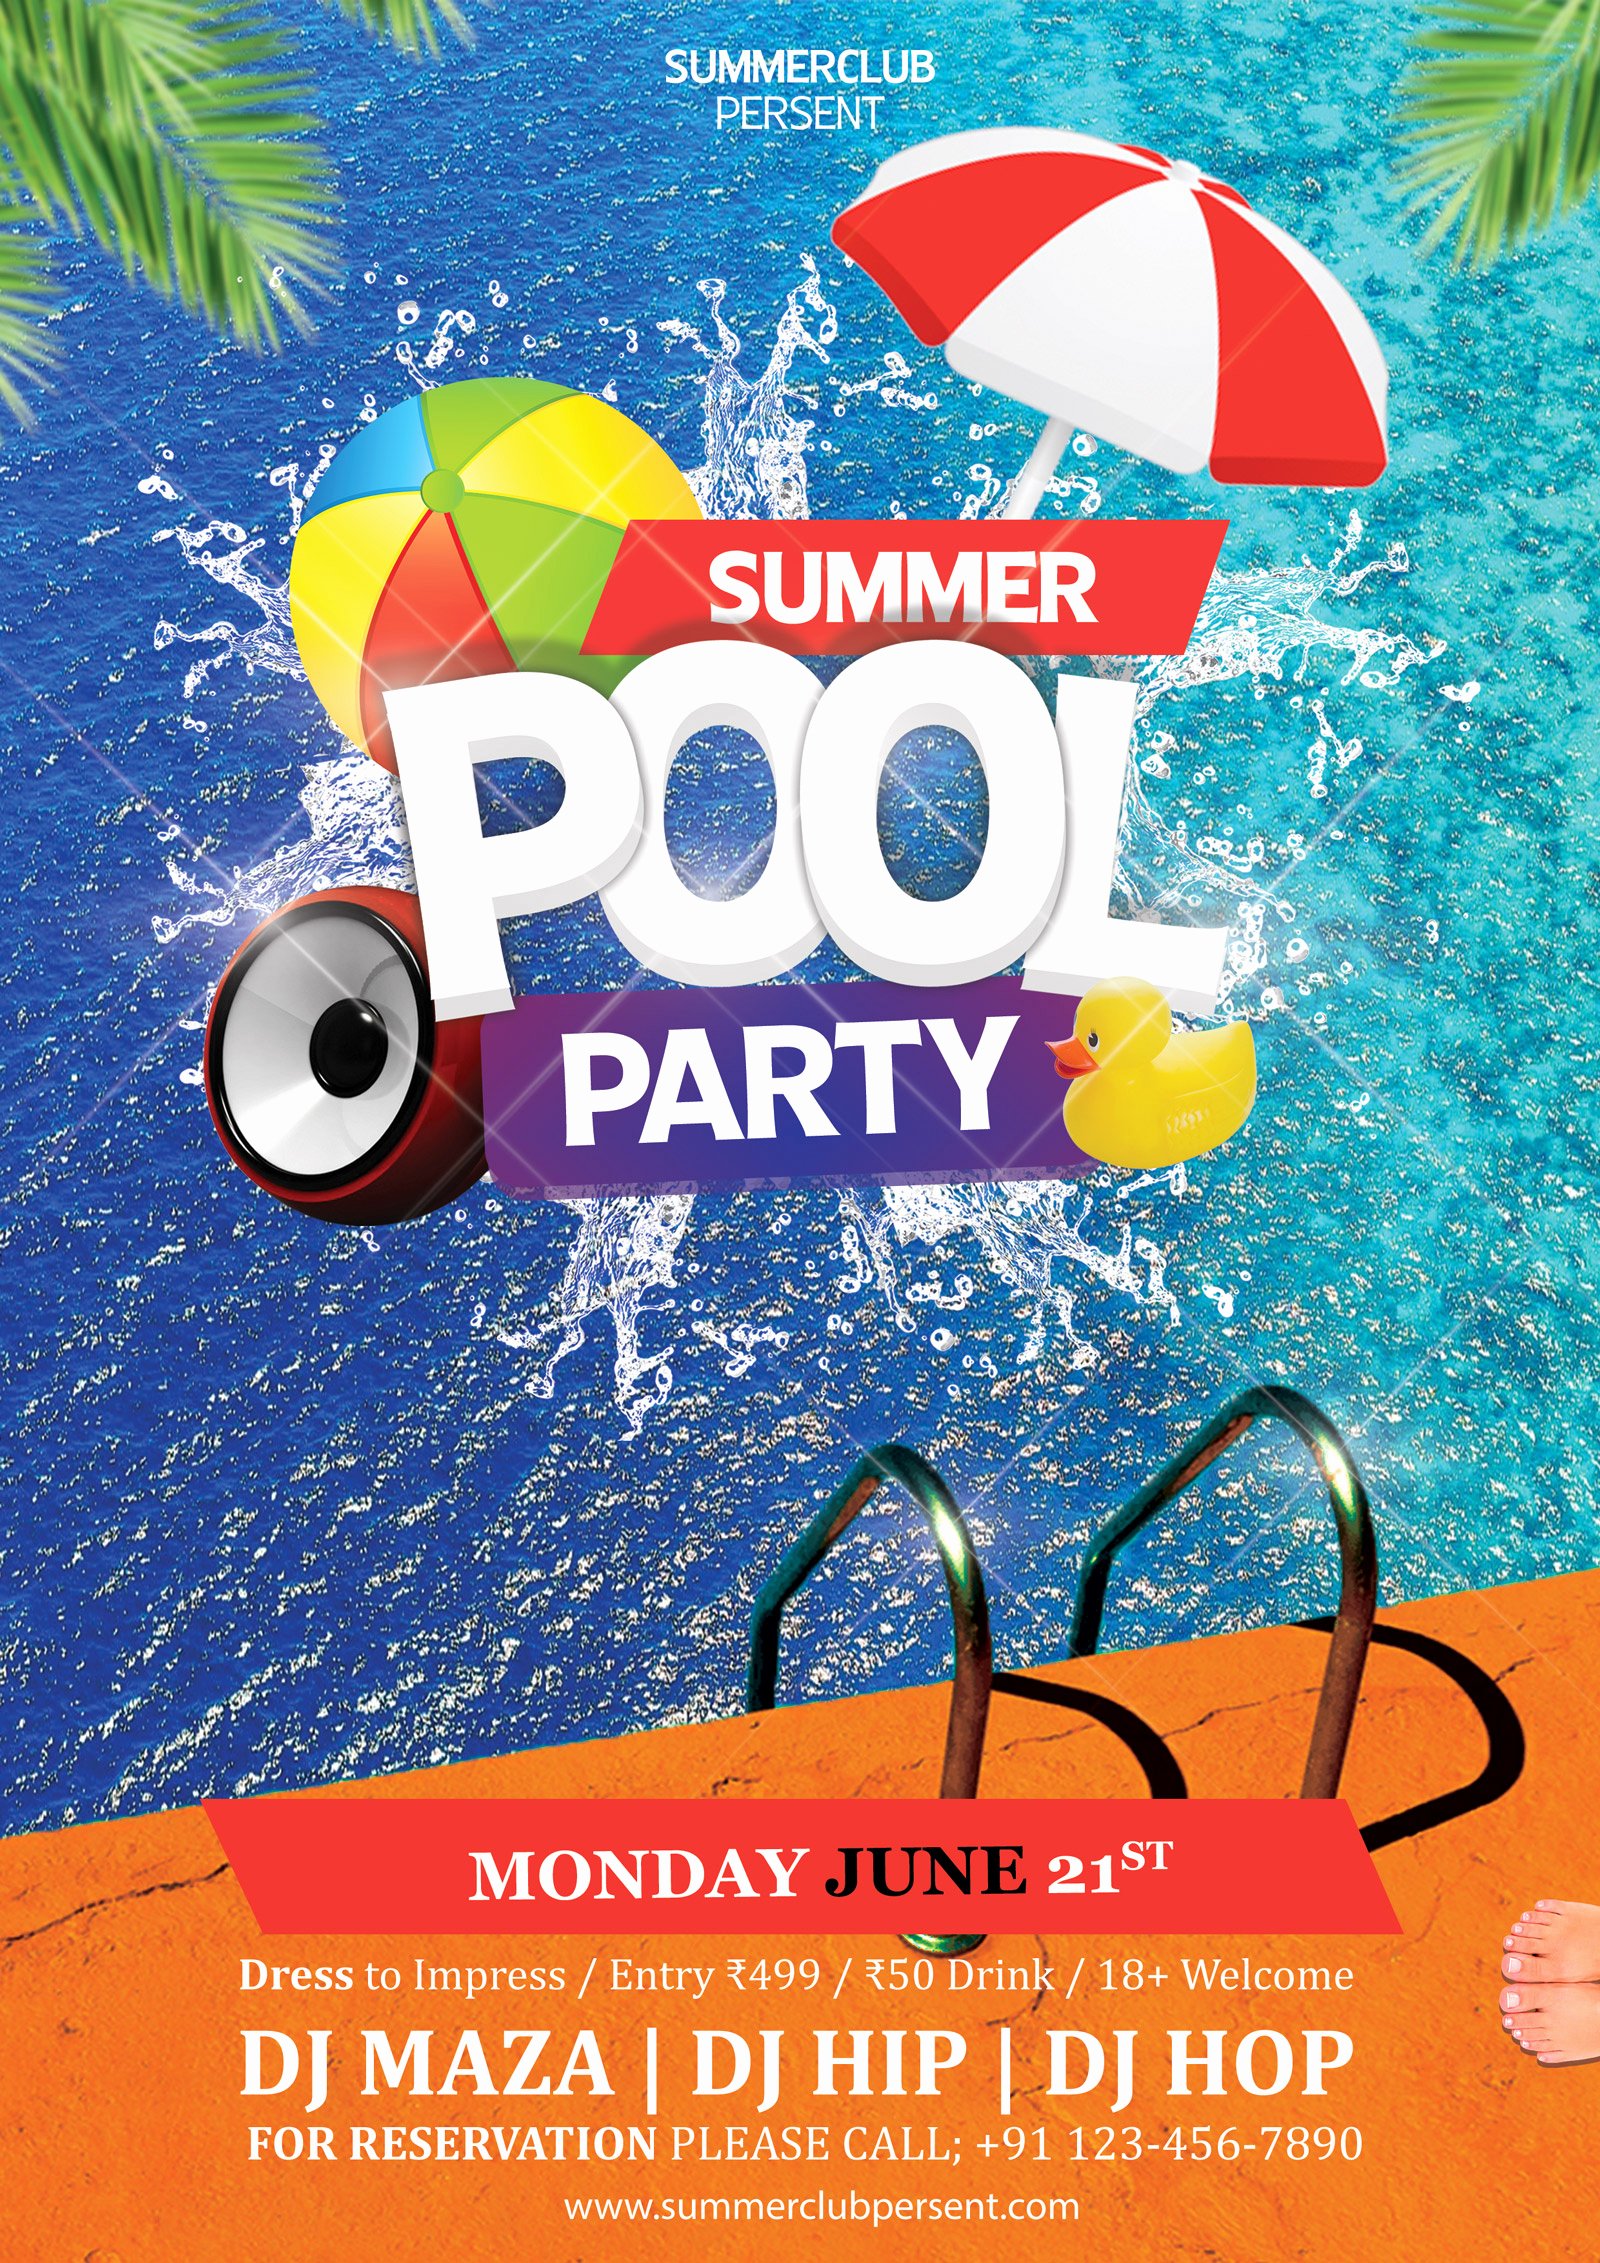 Pool Party Flyers Templates New Pool Party Psd Flyer